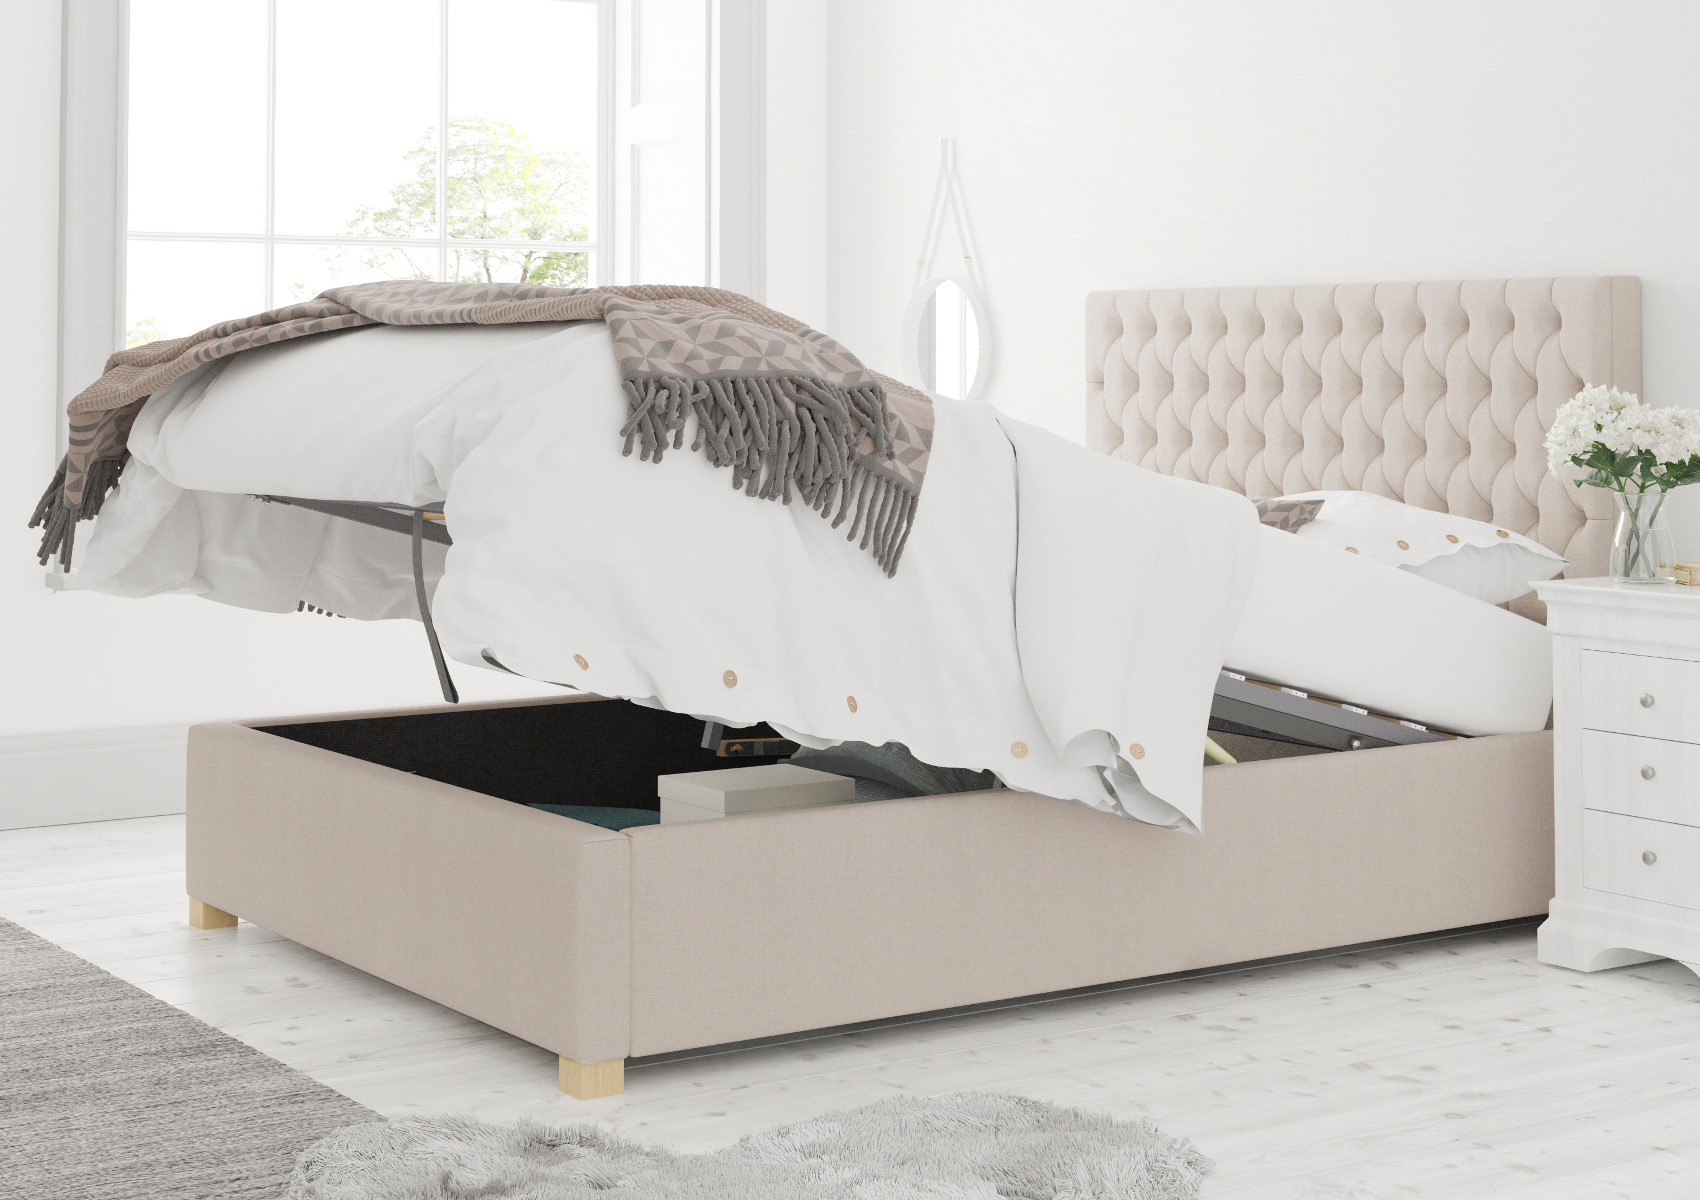 View Malton Off White Upholstered Super King Ottoman Bed Time4Sleep information